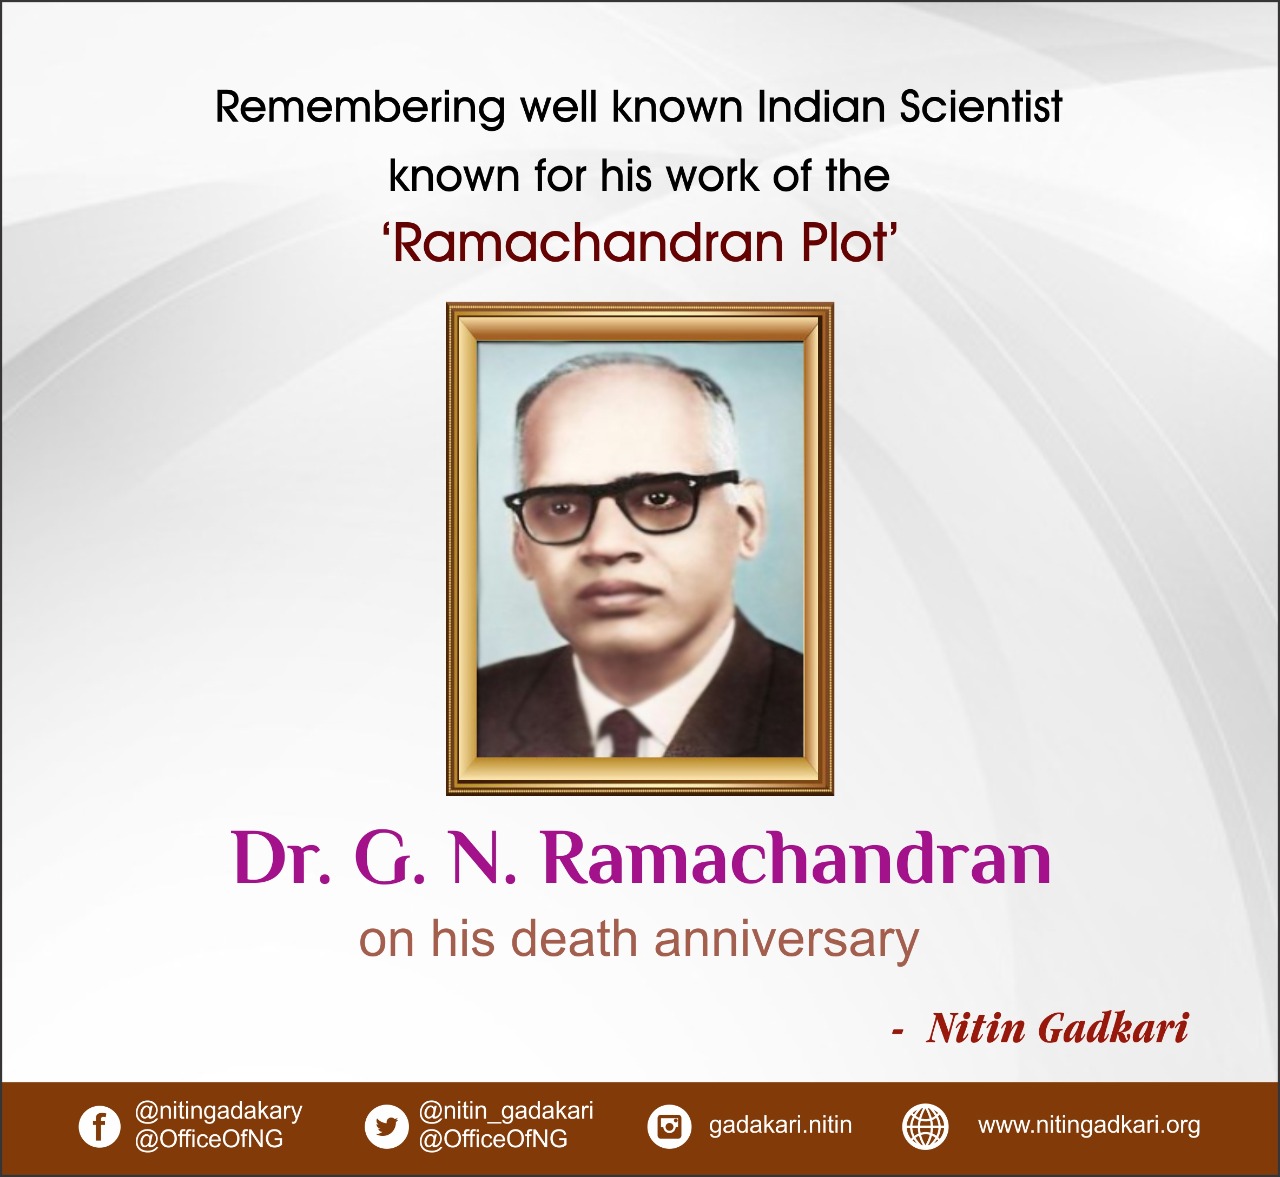 Nitin Gadkari on Twitter: "Remembering well known Indian Scientist known for his work of the 'Ramachandran Plot' Dr. G. N. Ramachandran on his death anniversary. https://t.co/FnzL3sYqiM" / Twitter